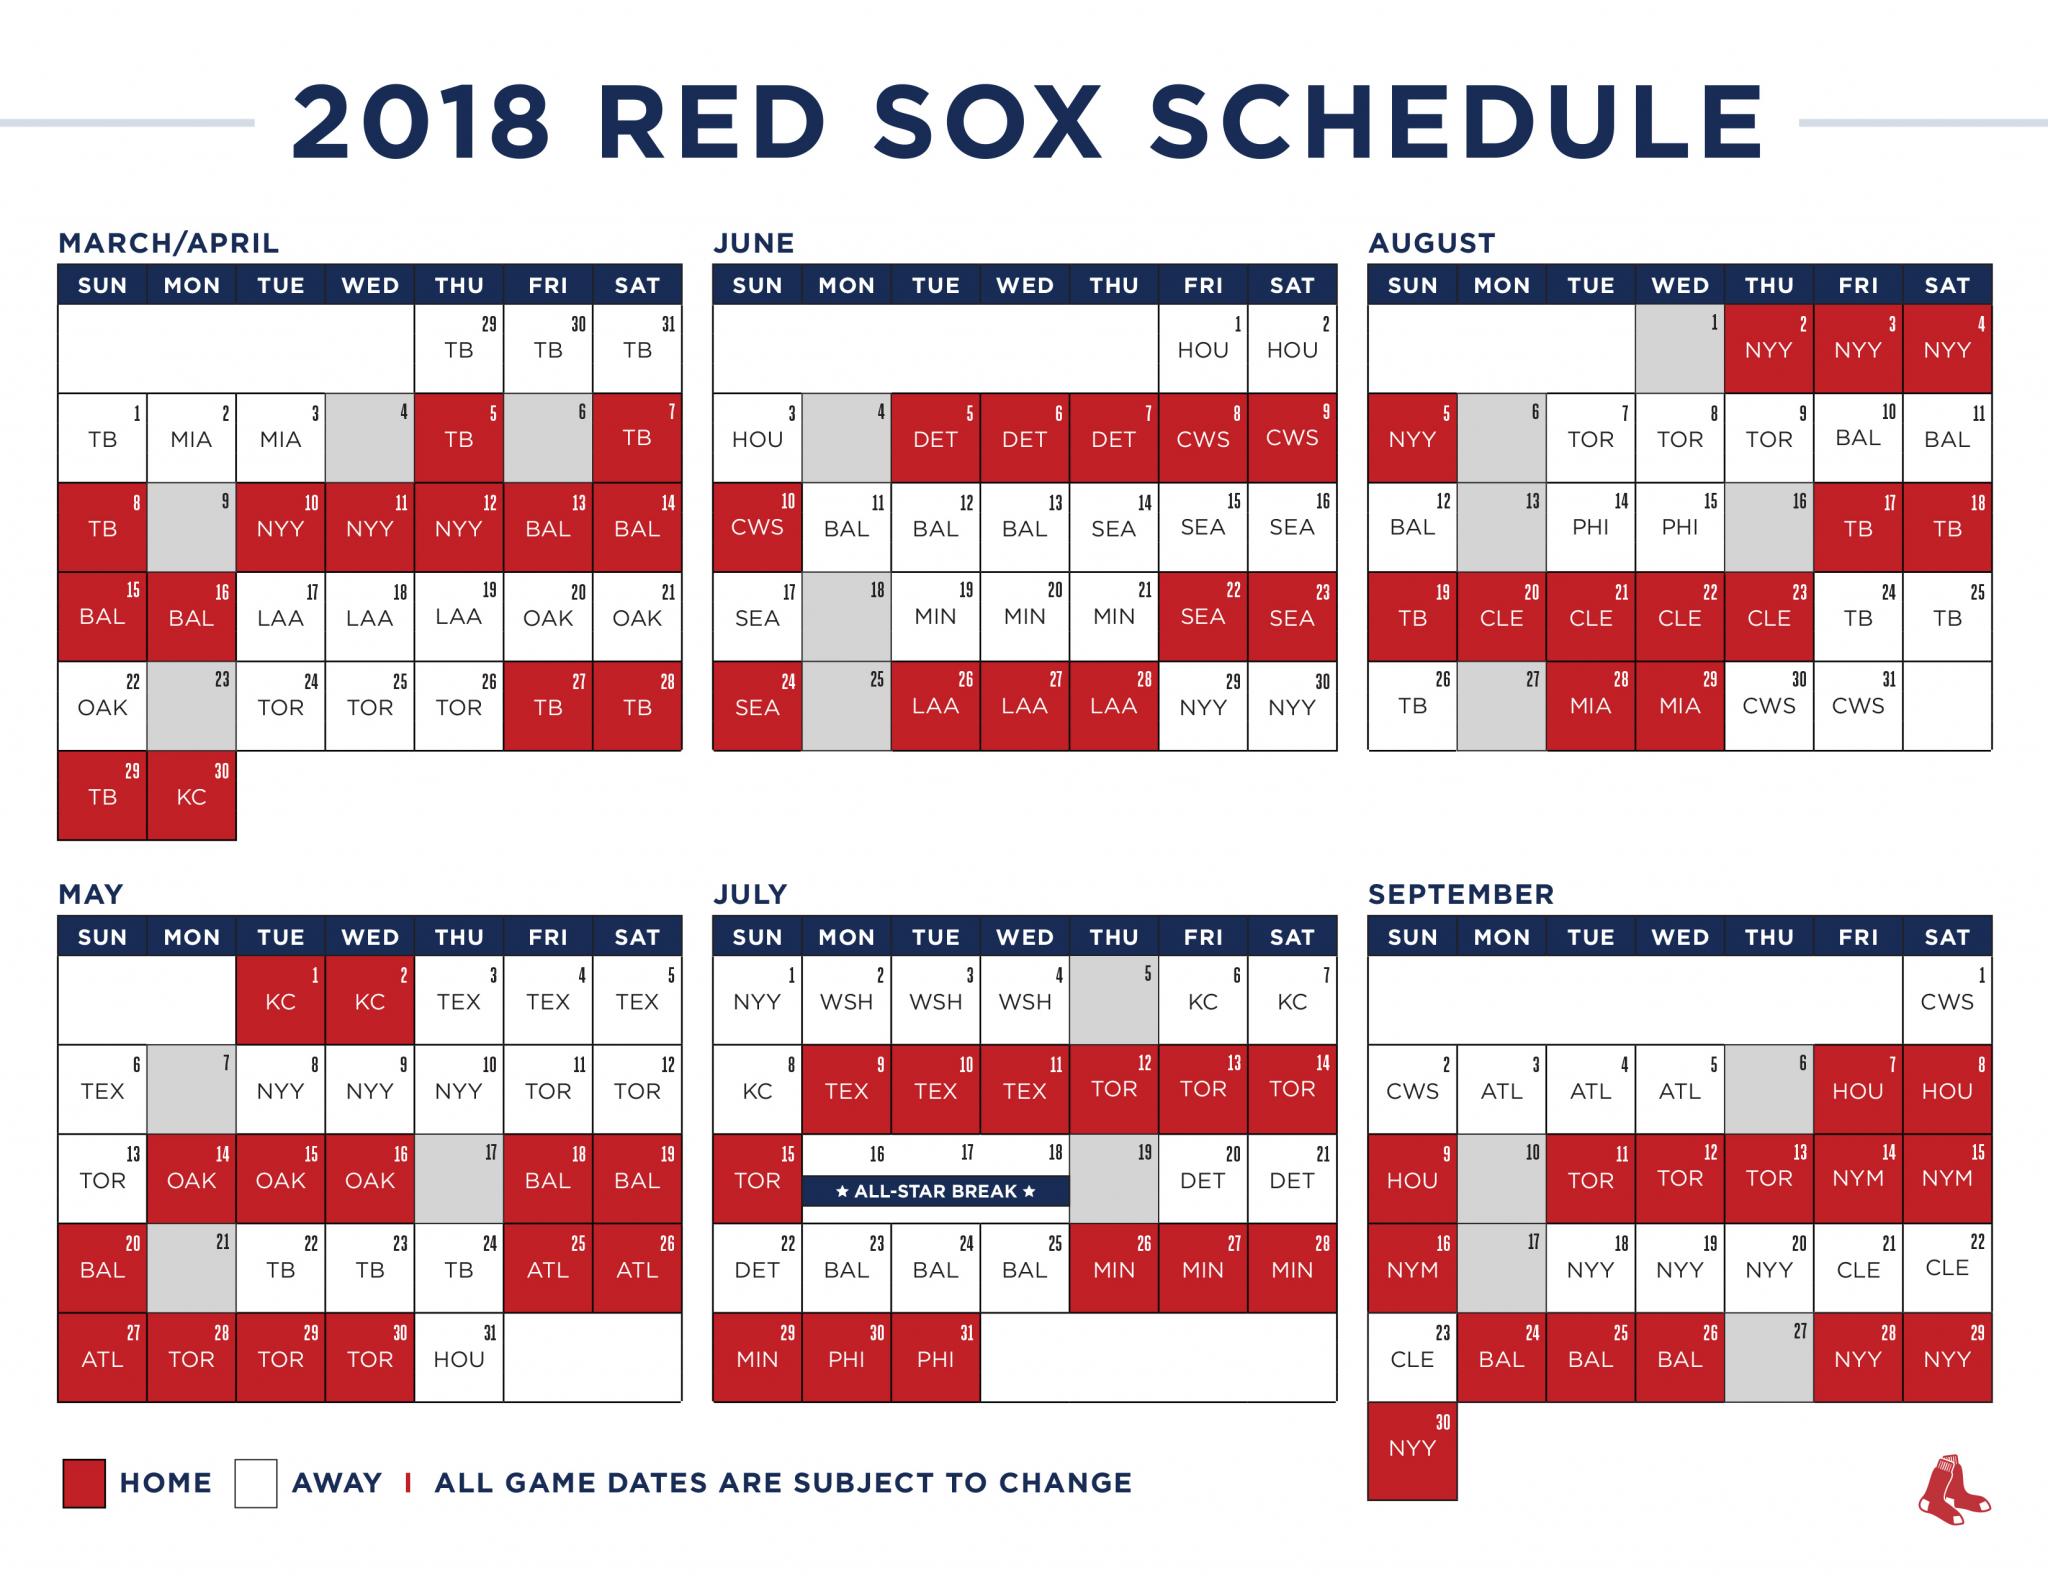 The Red Sox 2018 schedule is wacky | WEEI